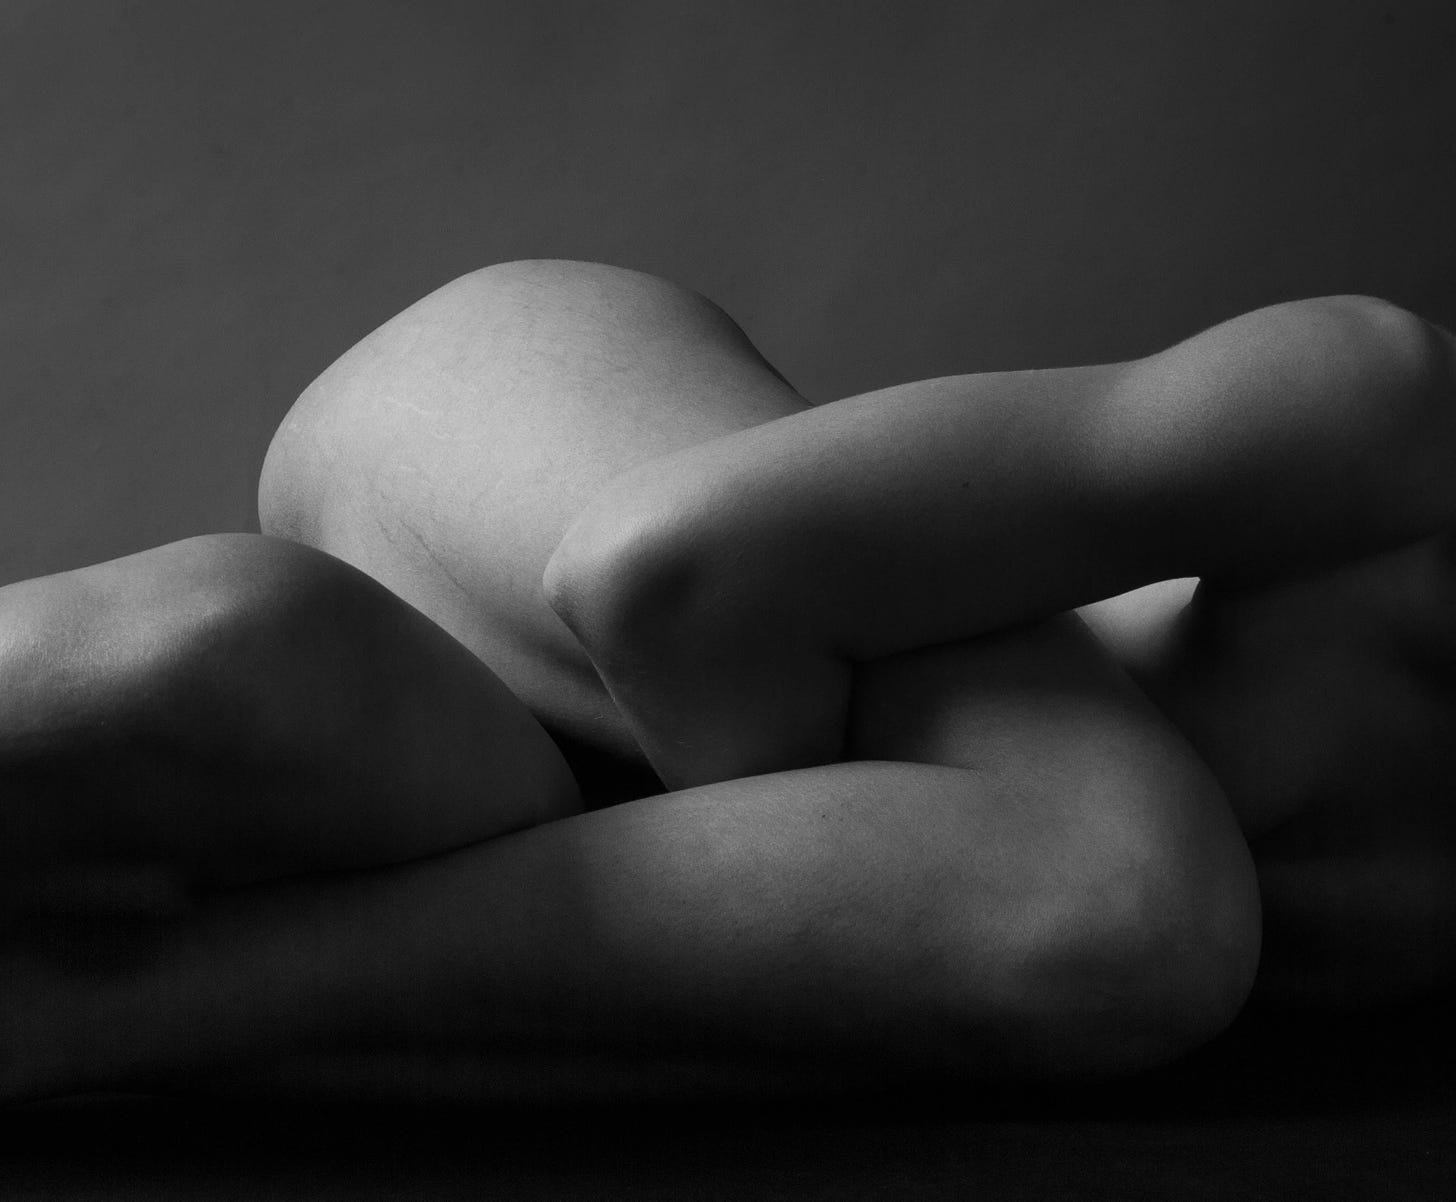 An abstract image of bodies